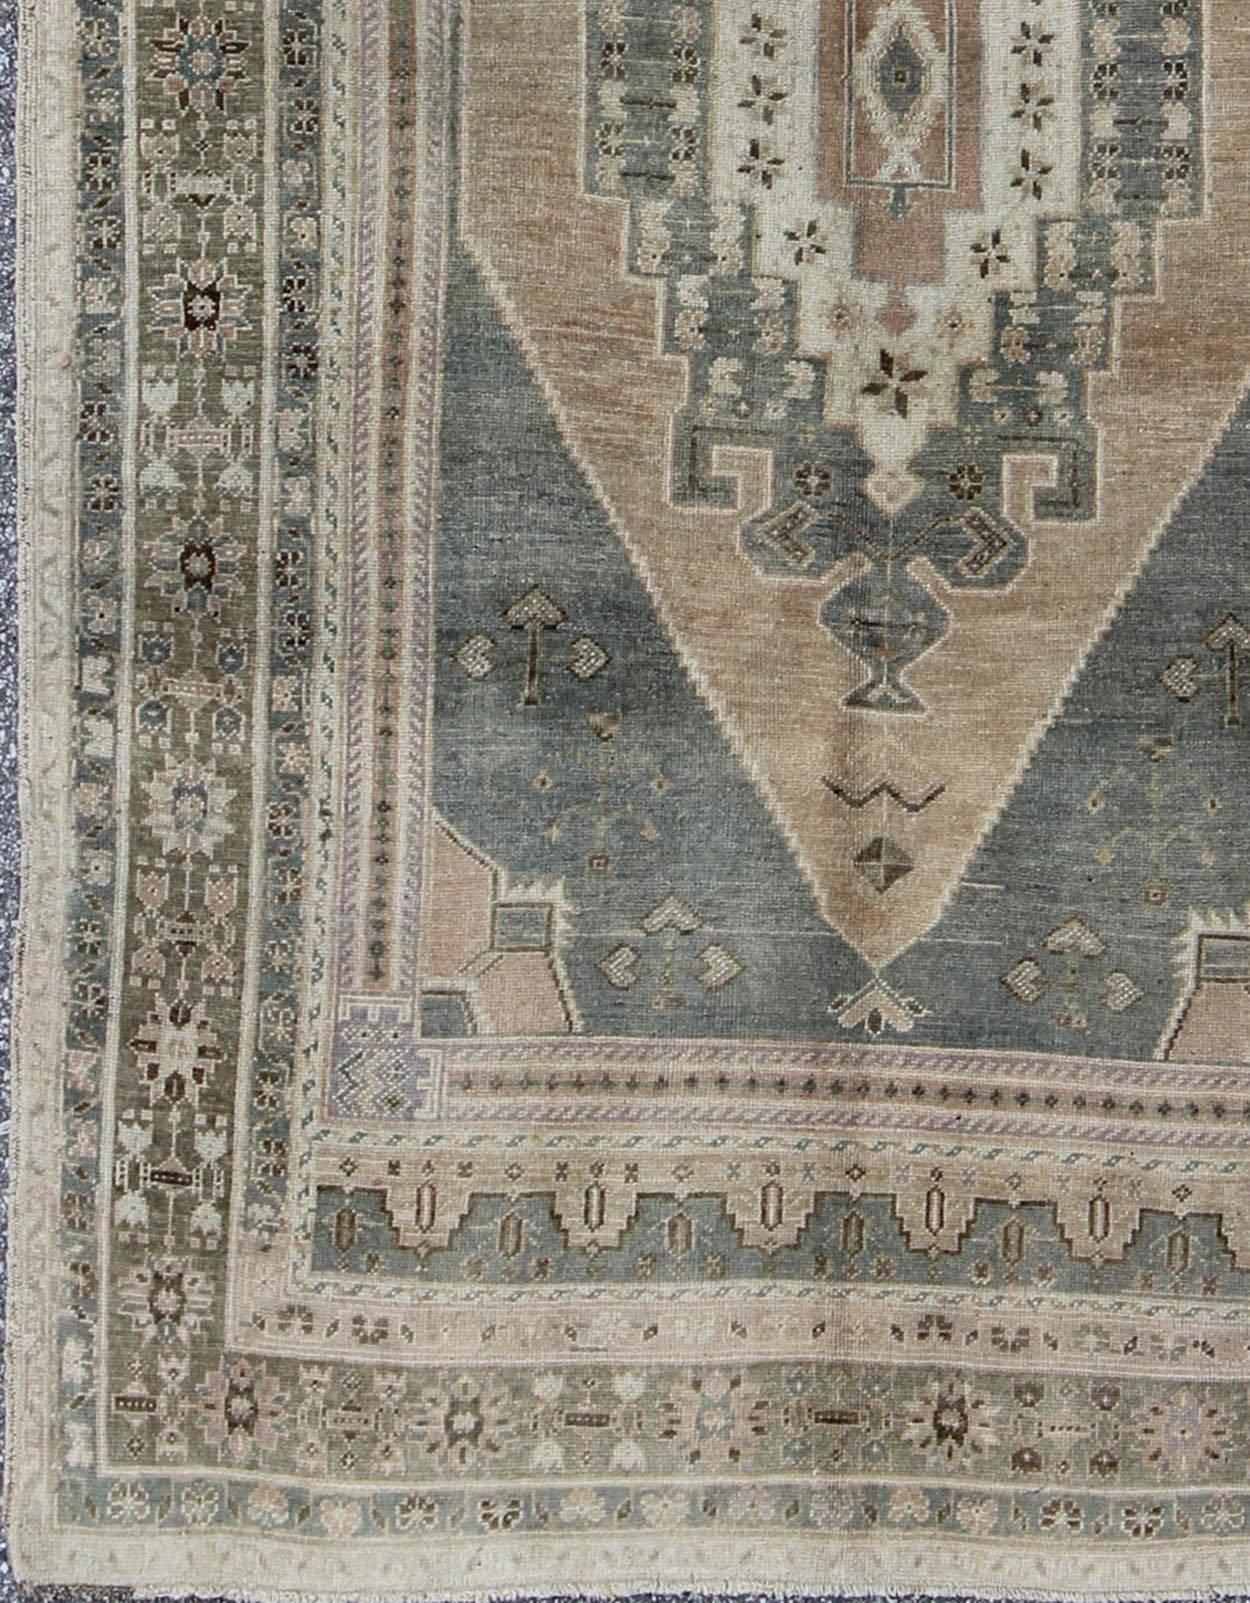 Vintage Oushak in Gray Green, Beige, Camel Background and Light Green Border. 
Rug / TU-UGU-136007
This unique Turkish Oushak has a Gray green background along with warm Camel, taupe and a light green border. The geometric design is softened by the